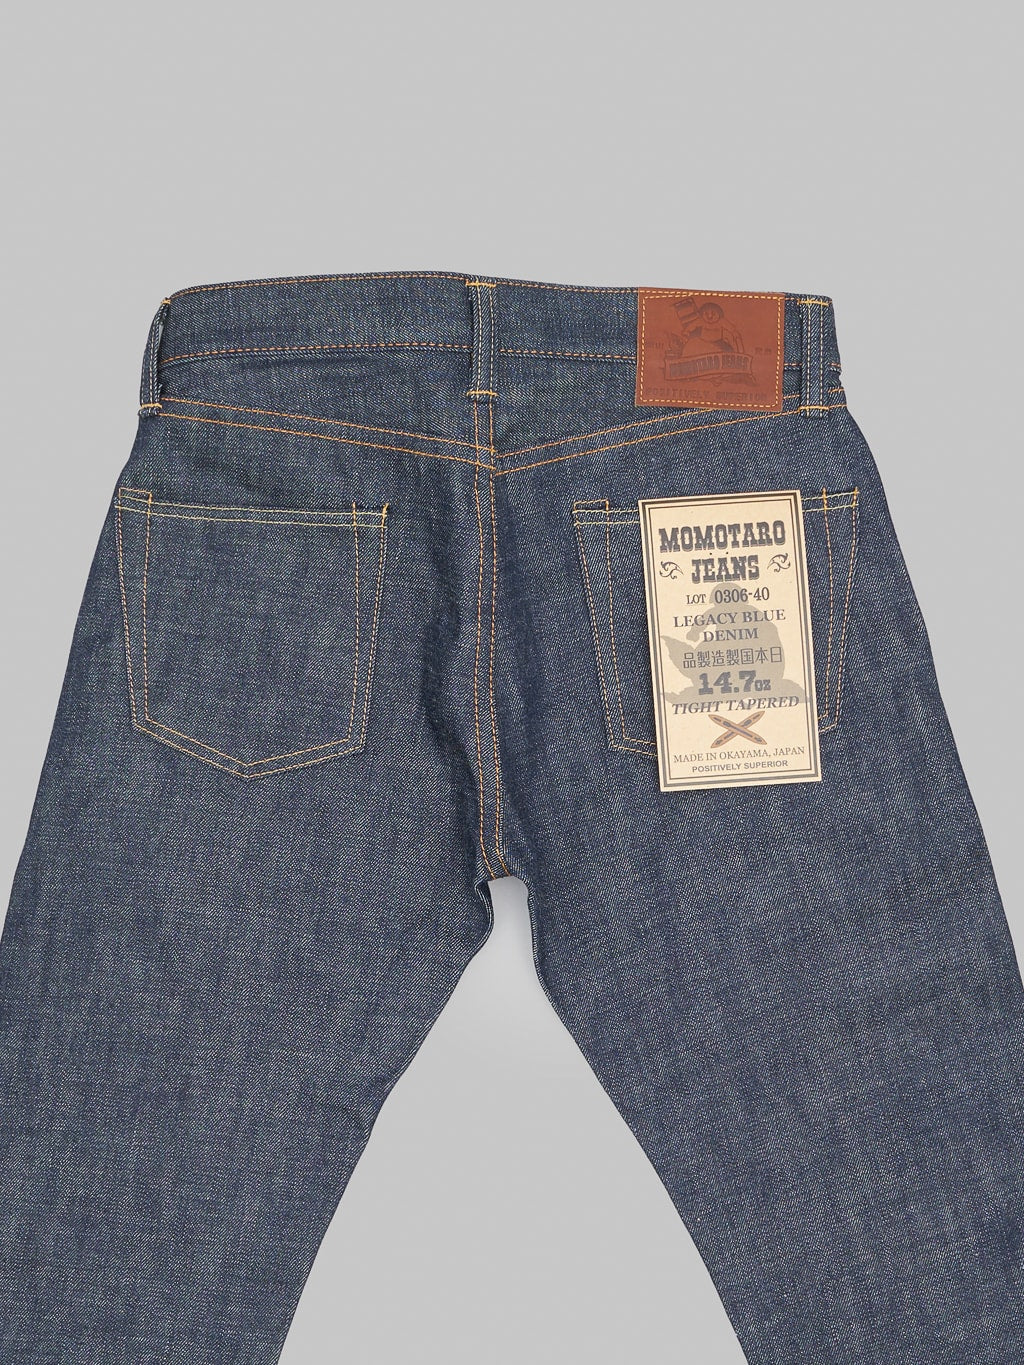 Momotaro 0306 40 Legacy Blue Tight Tapered Jeans back details